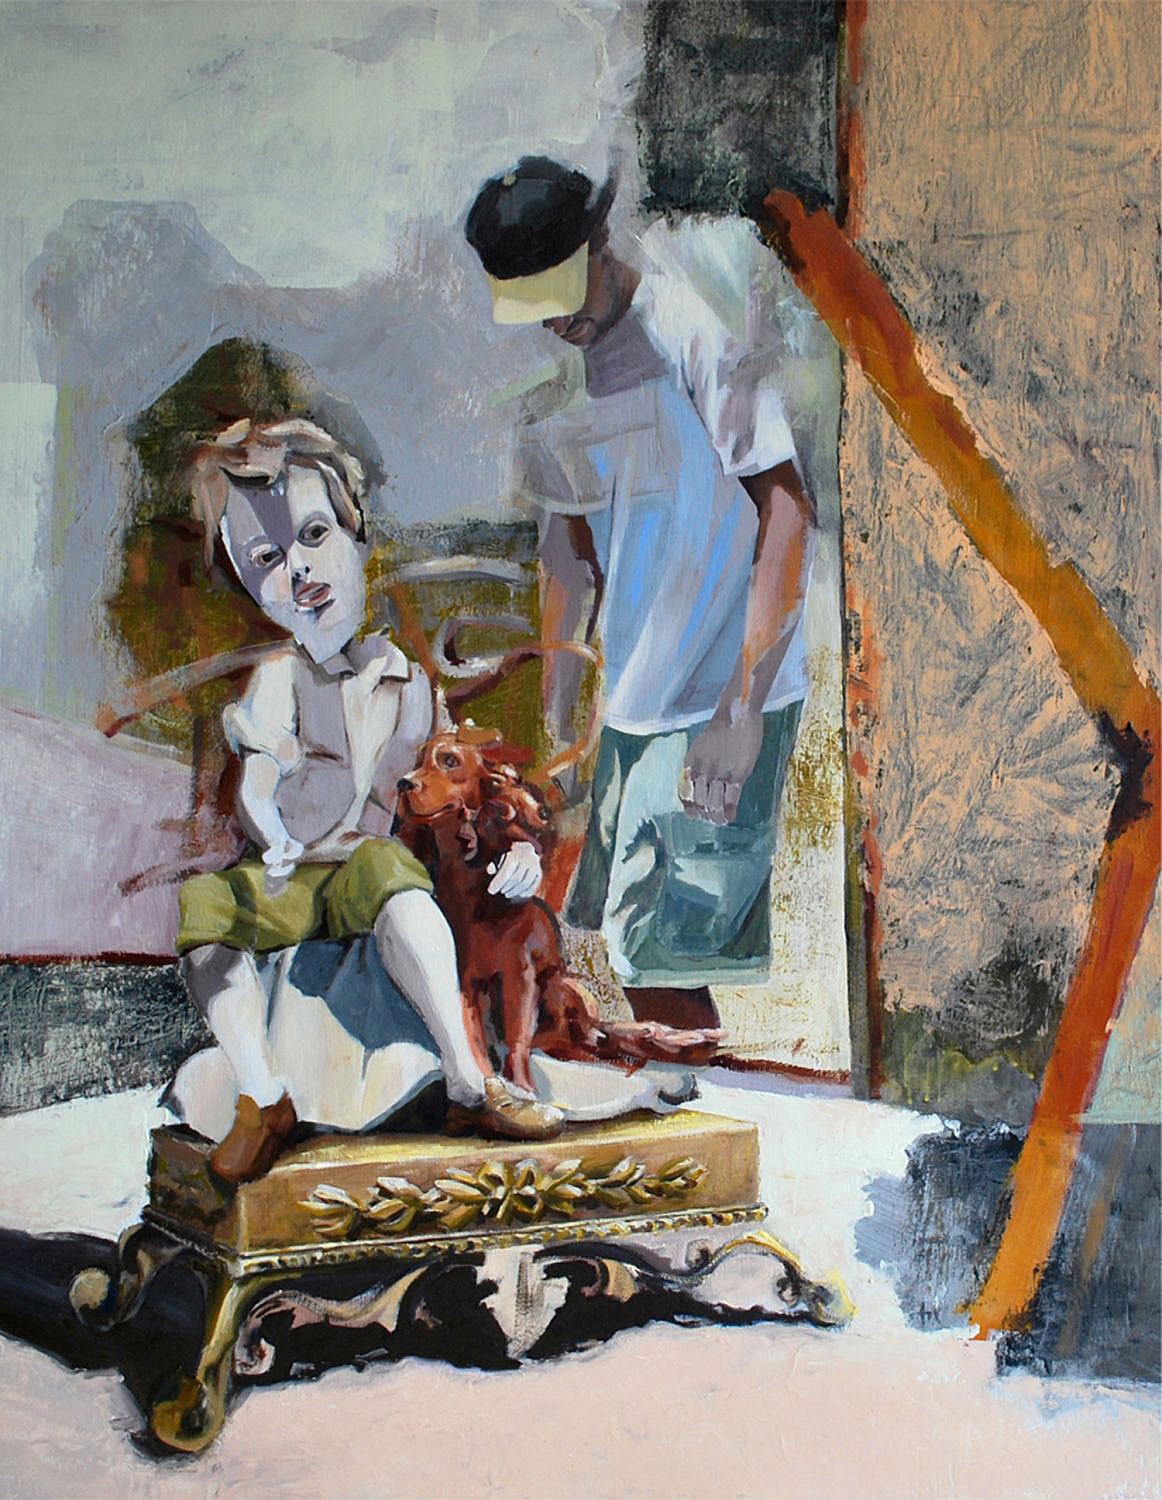 Nicholas Scrimenti, Mary’s Toys, 2012. Oil and acrylic on panel, 43 x 34 in.